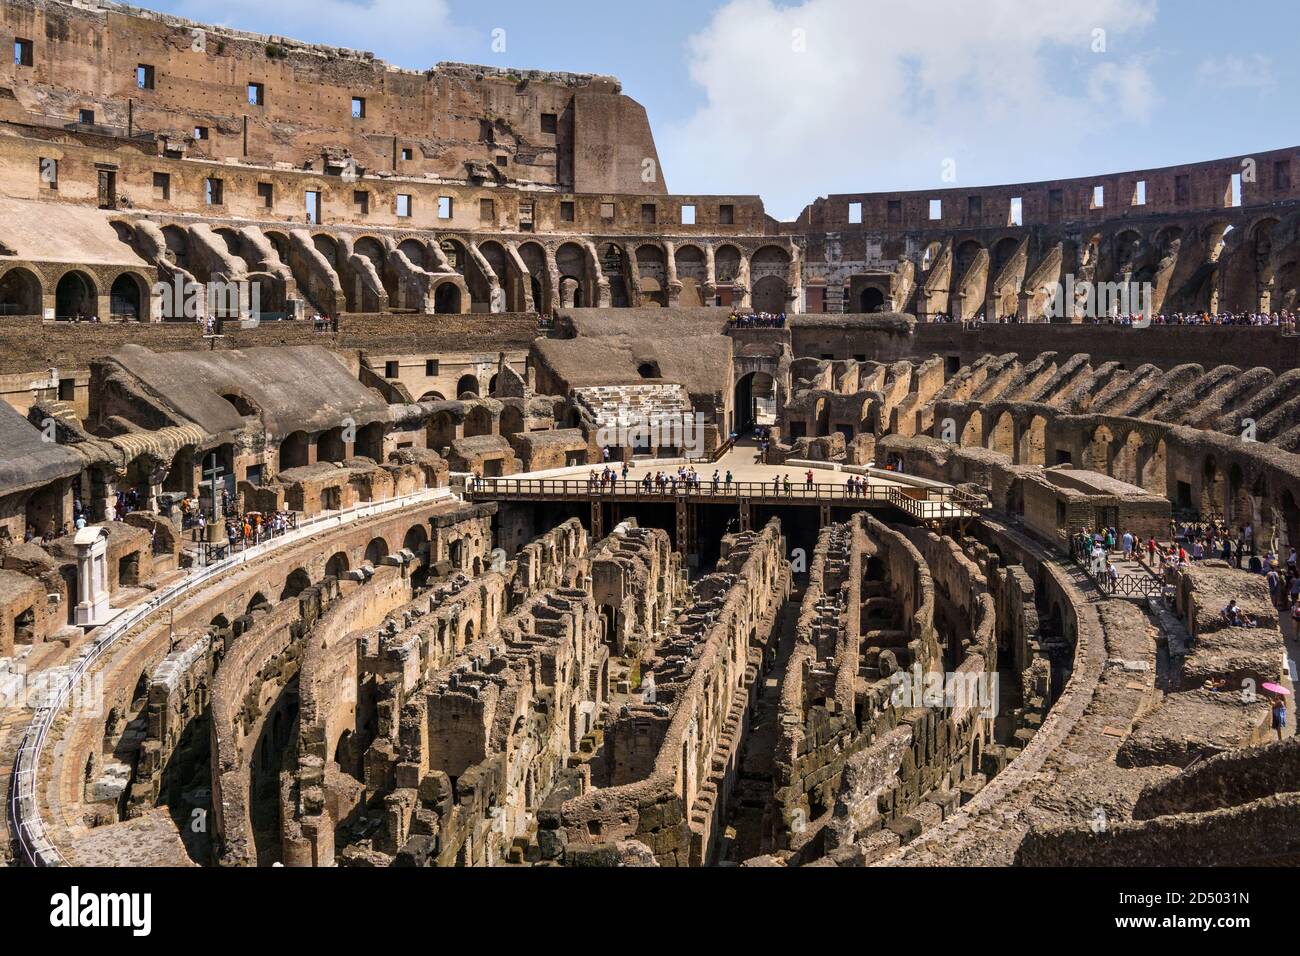 Interior of the Colisseum in Rome, Italy Stock Photo